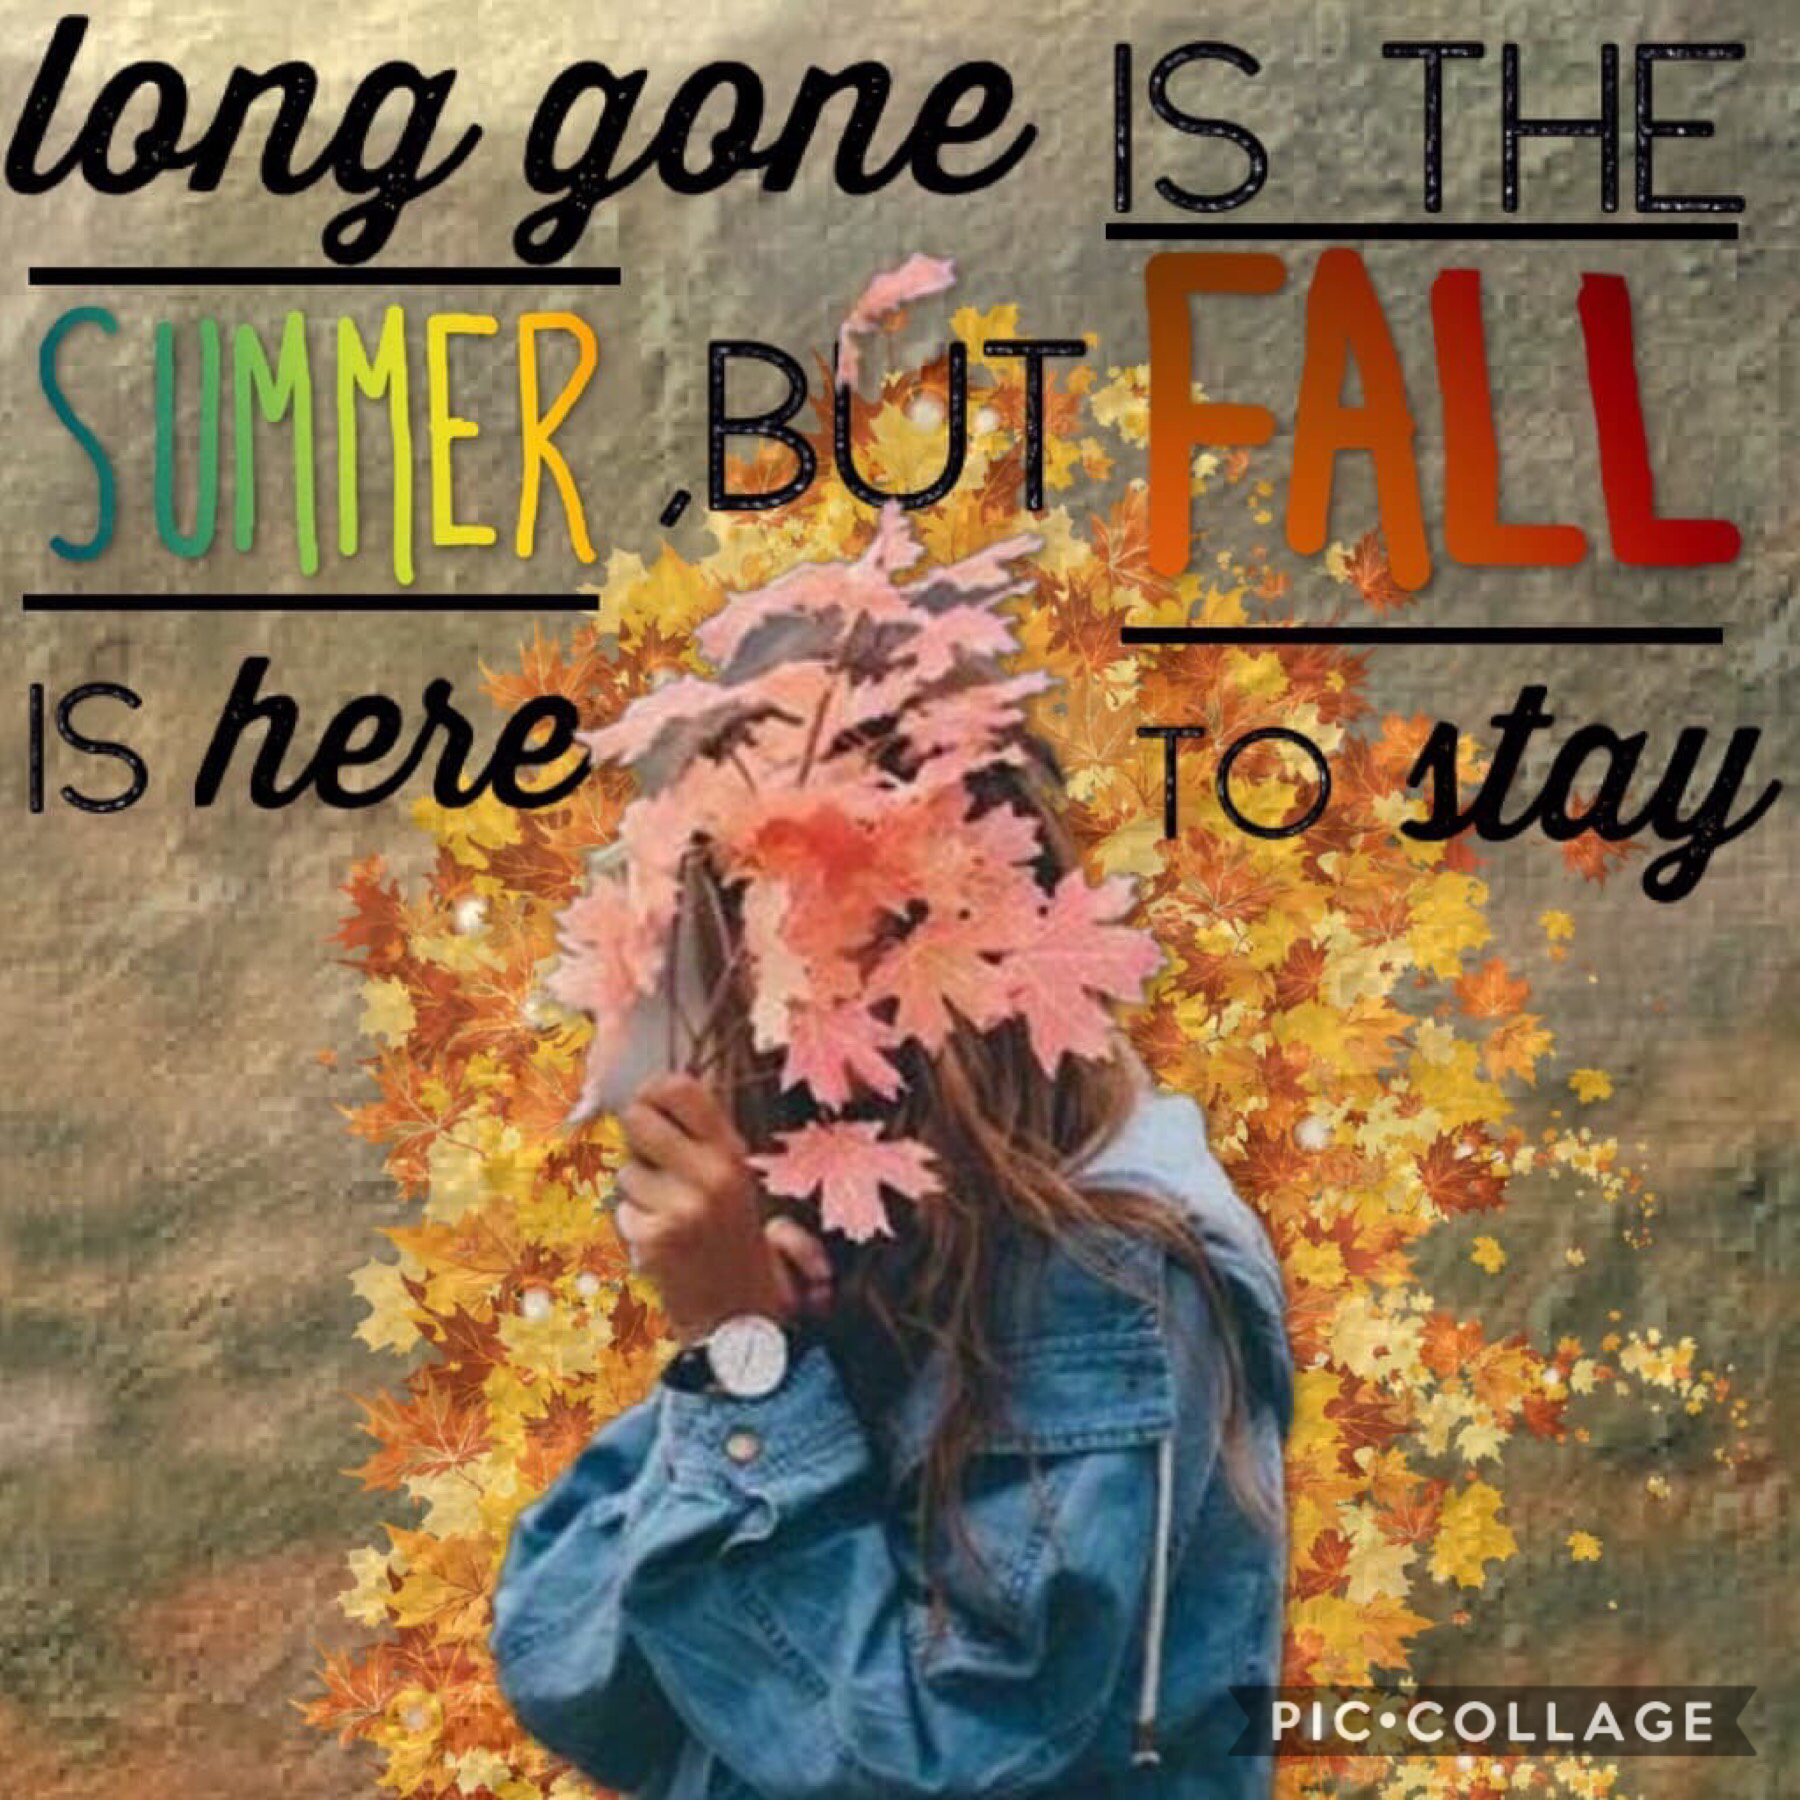 Tap!
I remixed PC’s post about summer turning to fall, and I’m satisfied with the result, so here it is!